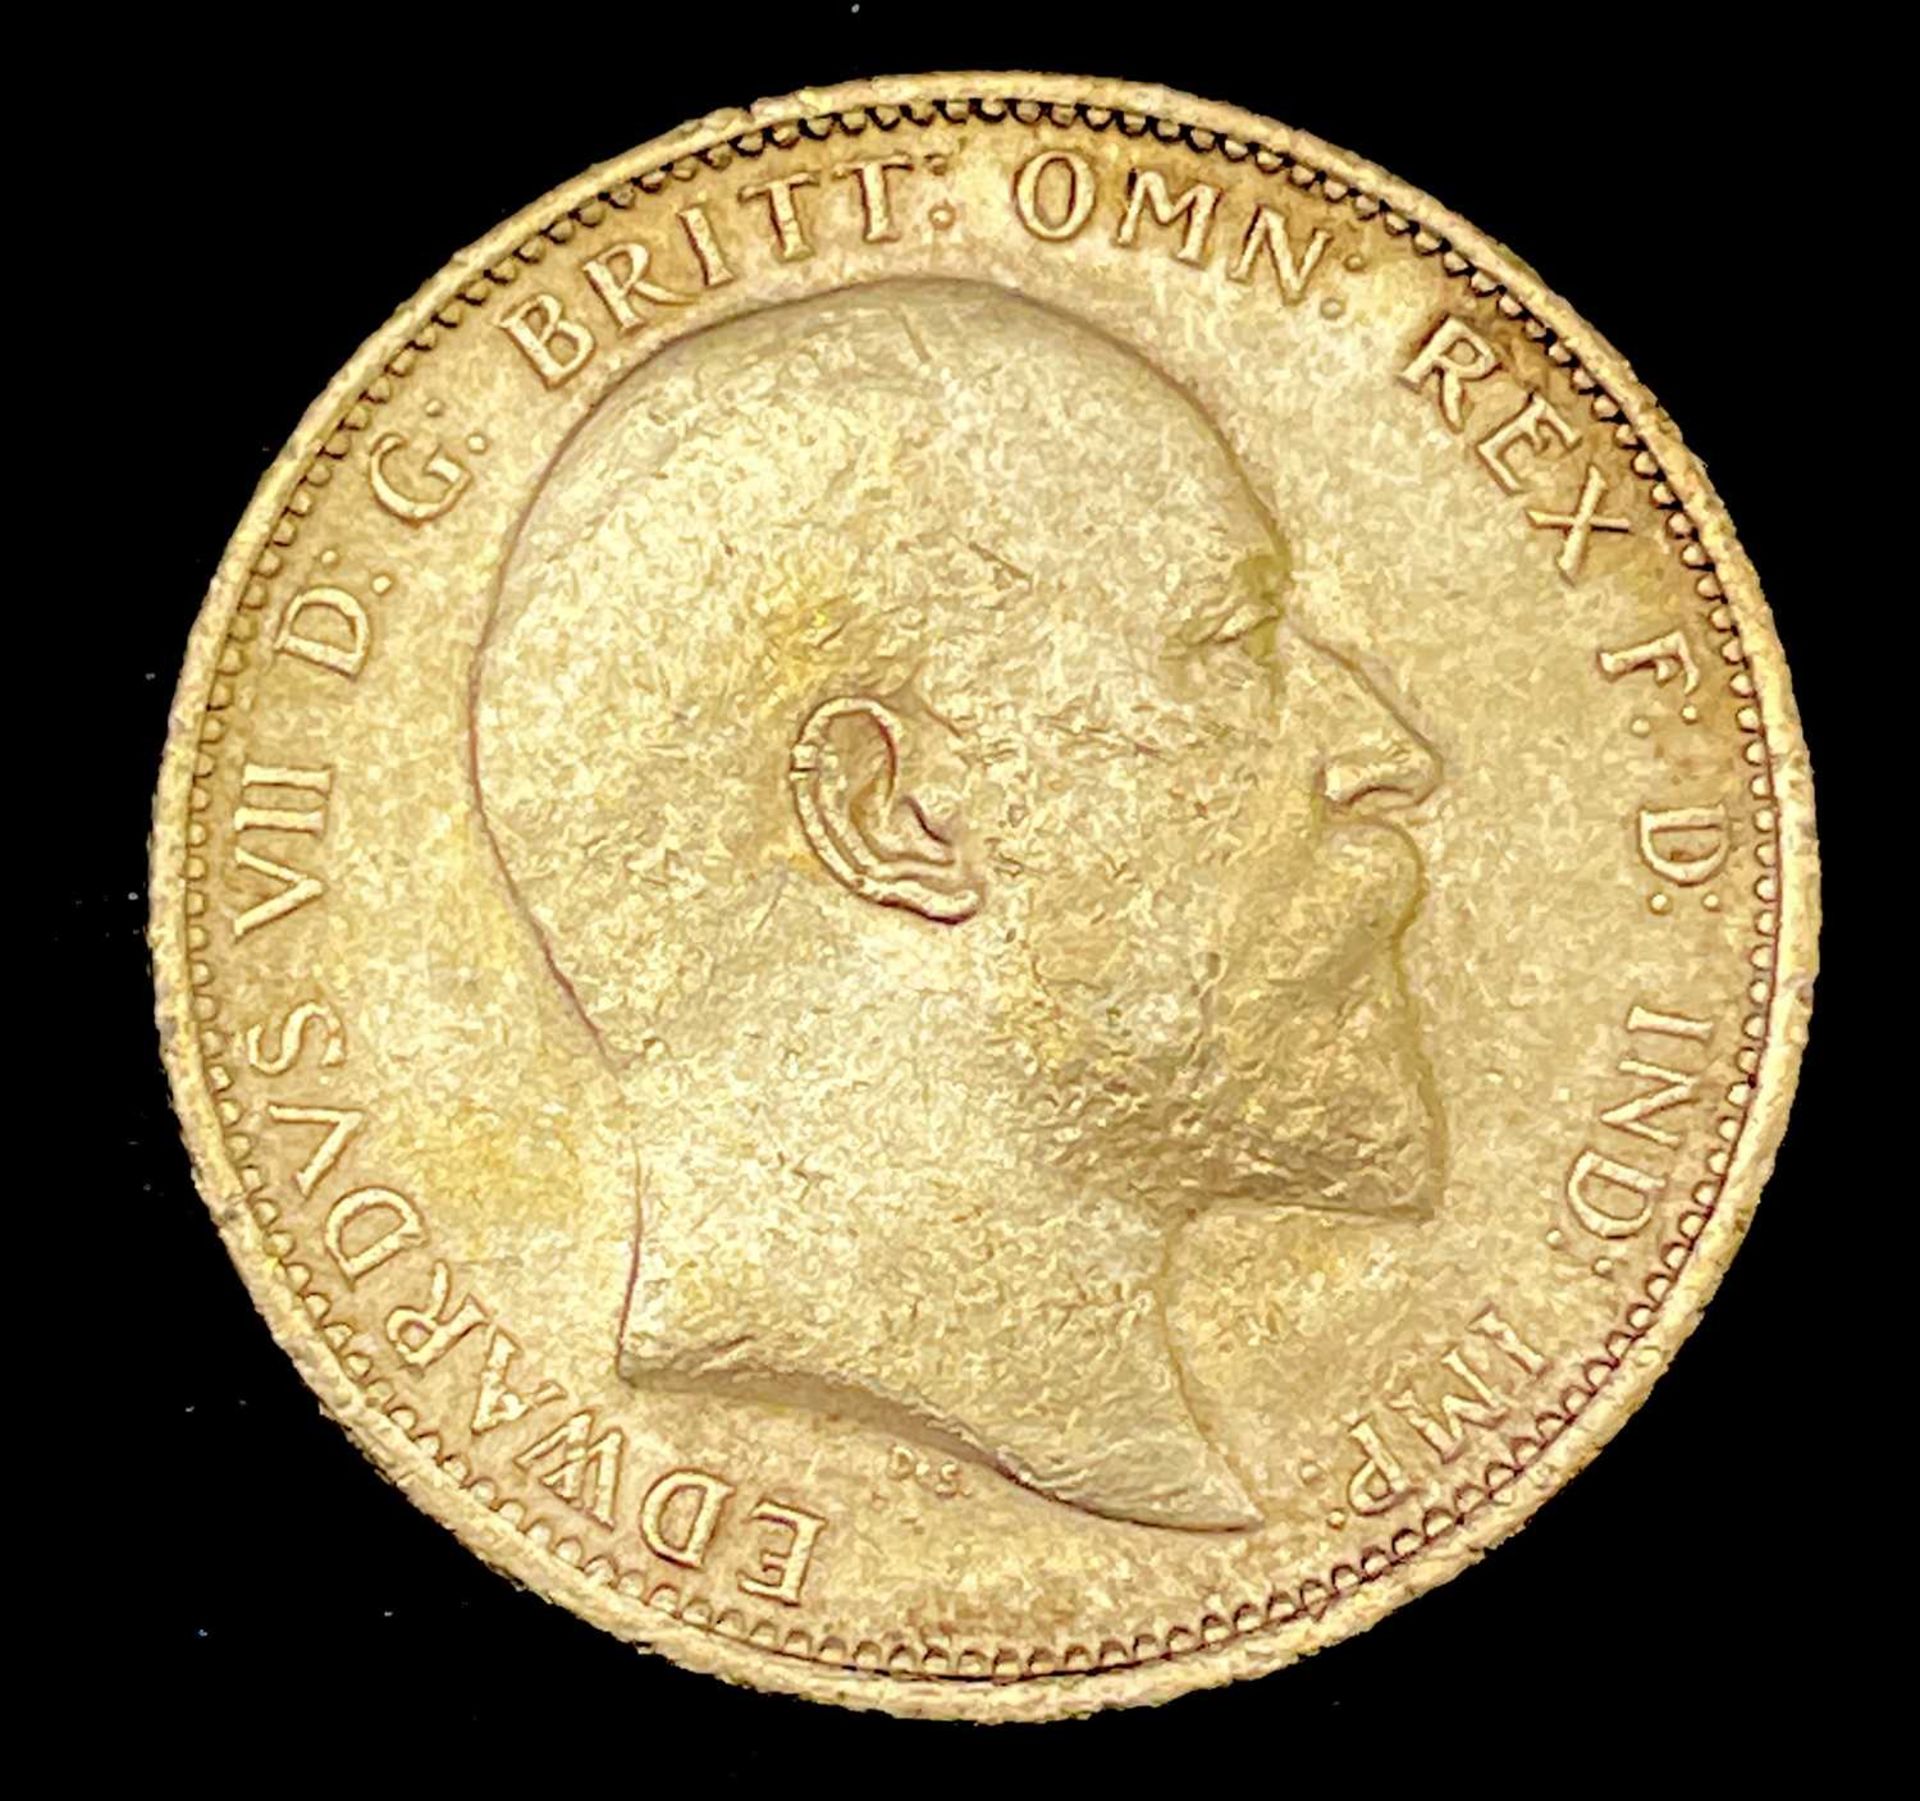 Great Britain Gold Sovereign 1904 Edward VII. Sydney Mint mark Condition: please request a condition - Image 4 of 4